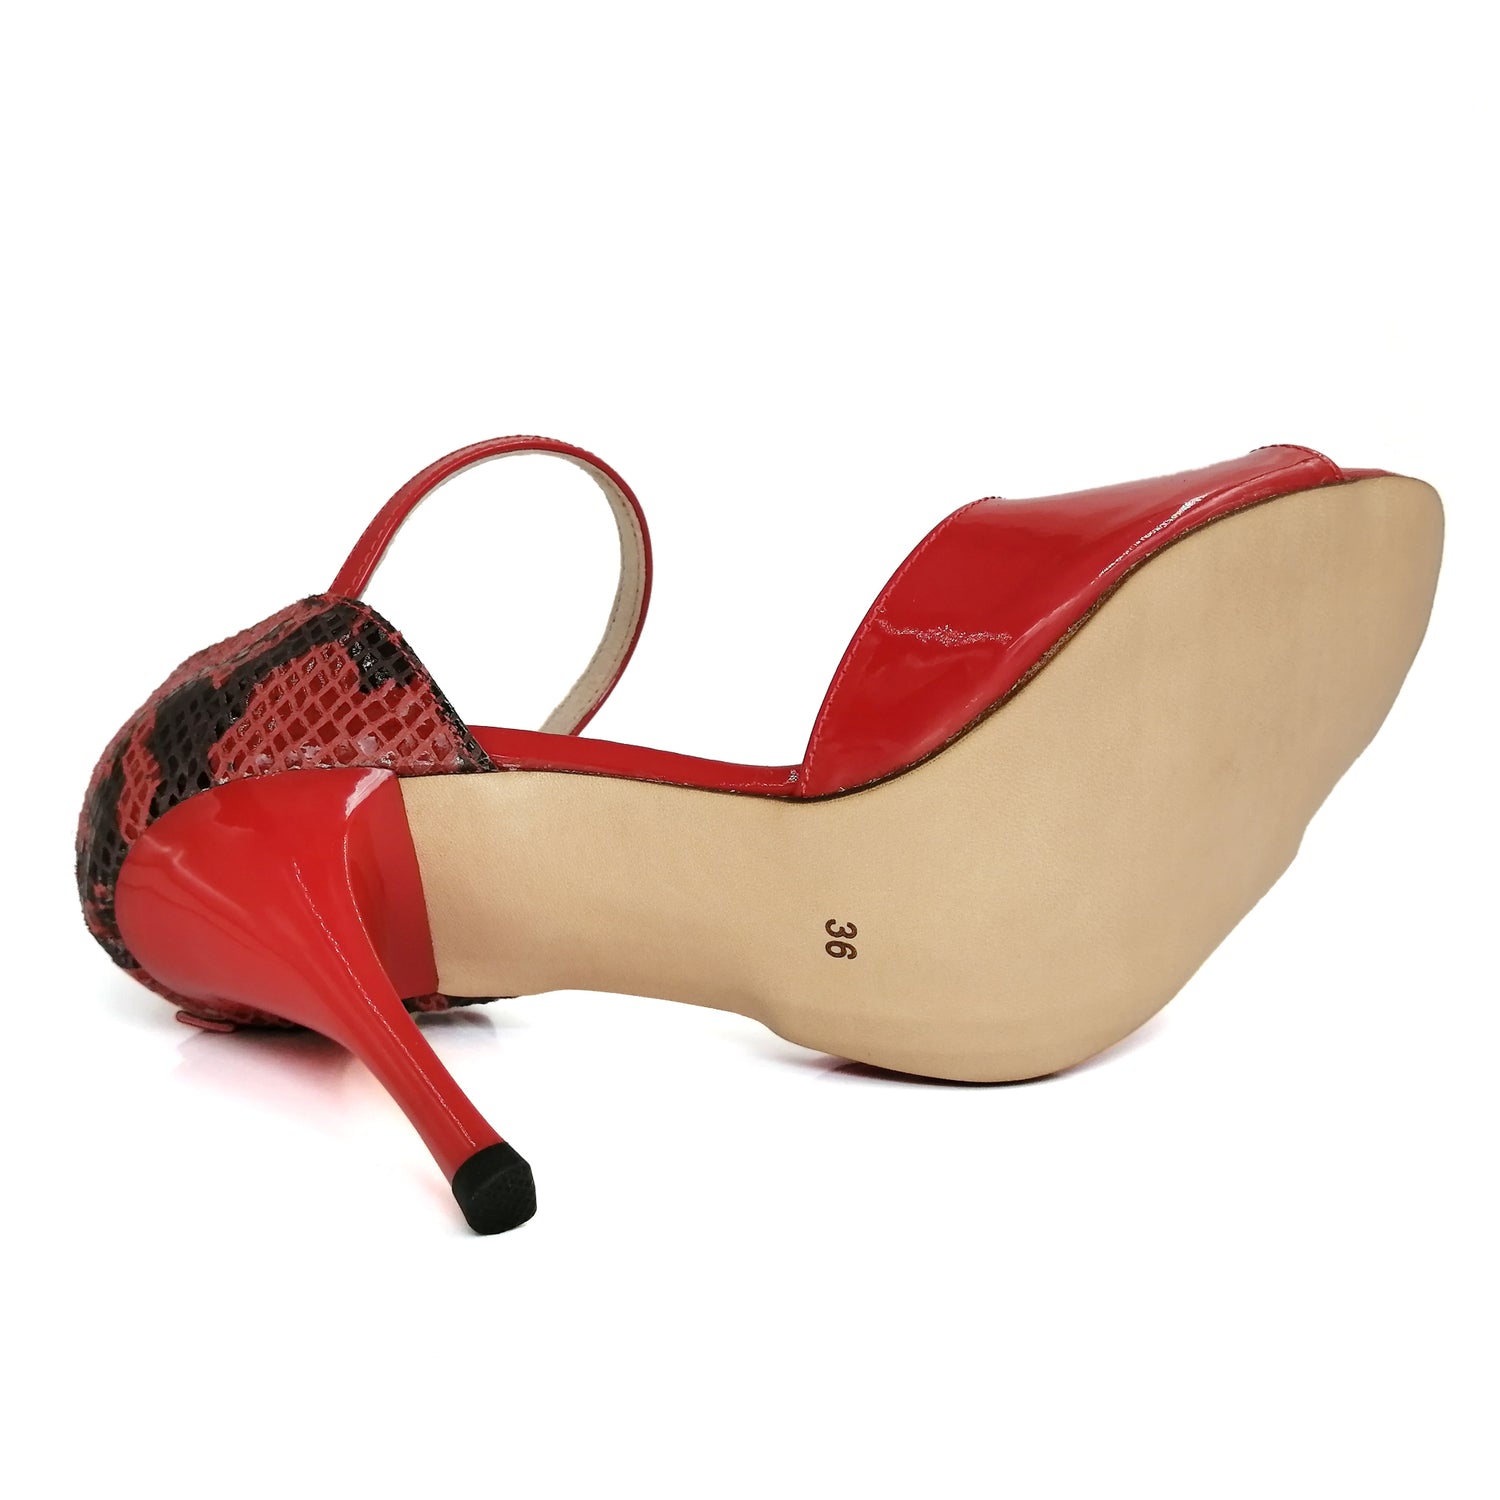 Pro Dancer Women's Argentine Tango Shoes High Heel Dance Sandals Leather Sole in Red5